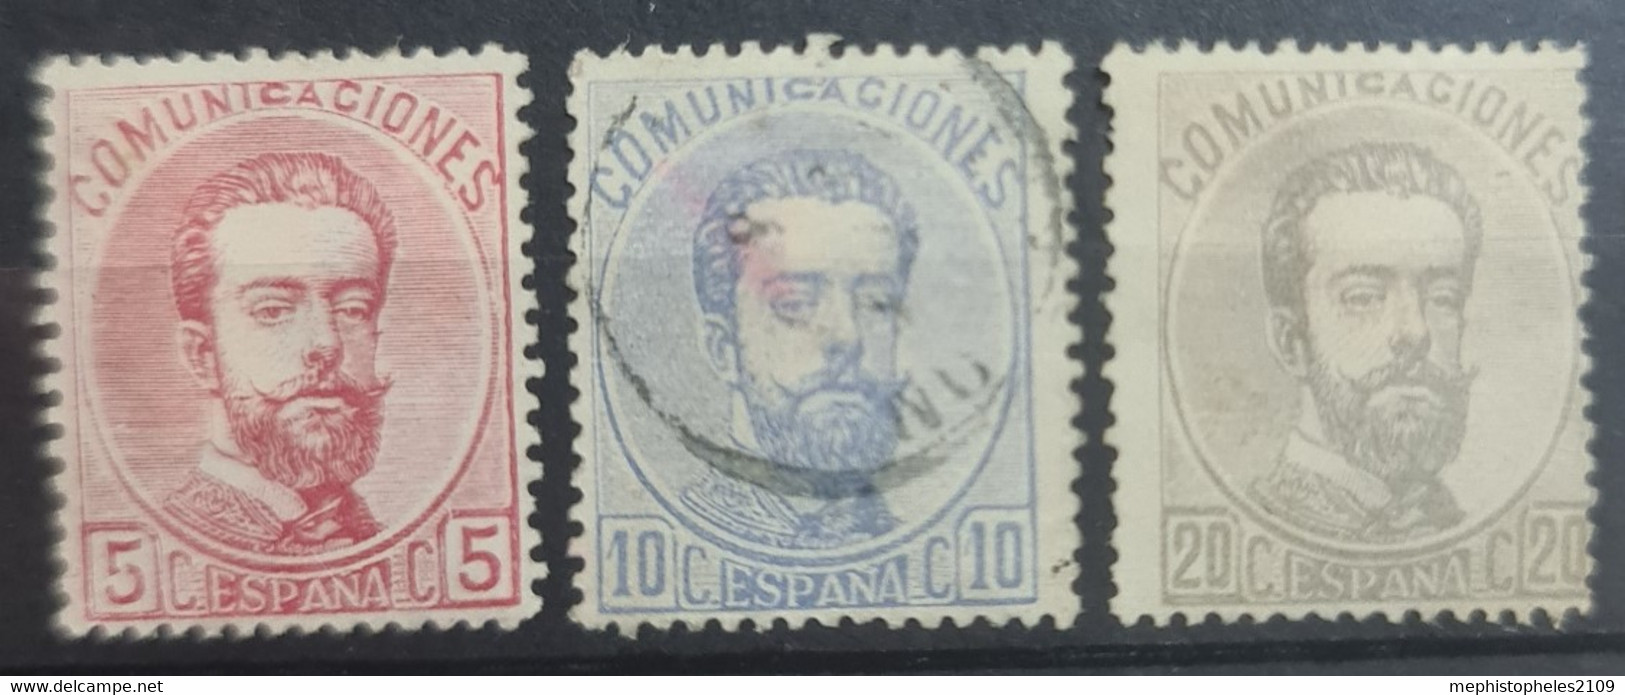 SPAIN 1873 - MLH/canceled - Sc# 178, 181, 183 - Unused Stamps